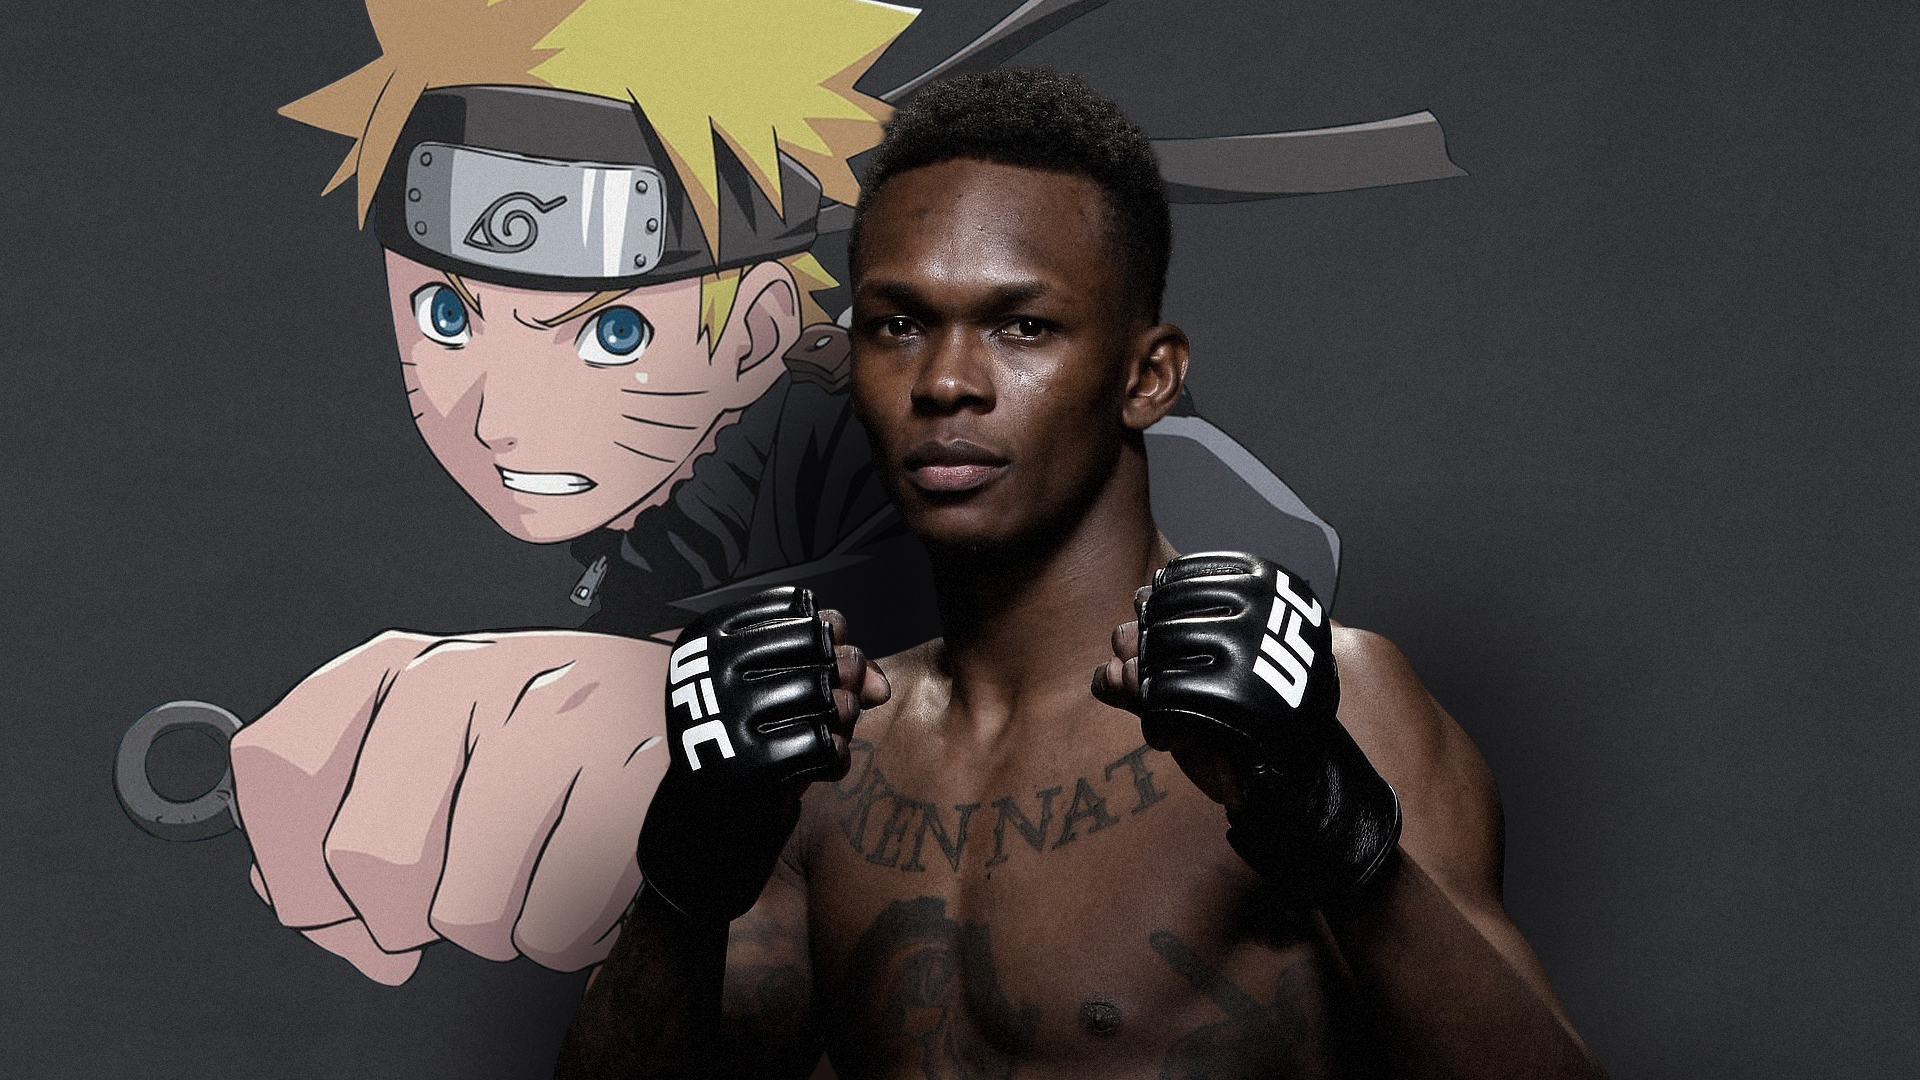 How Anime Fuelled Israel Adesanya's Ambition, Ability And ...